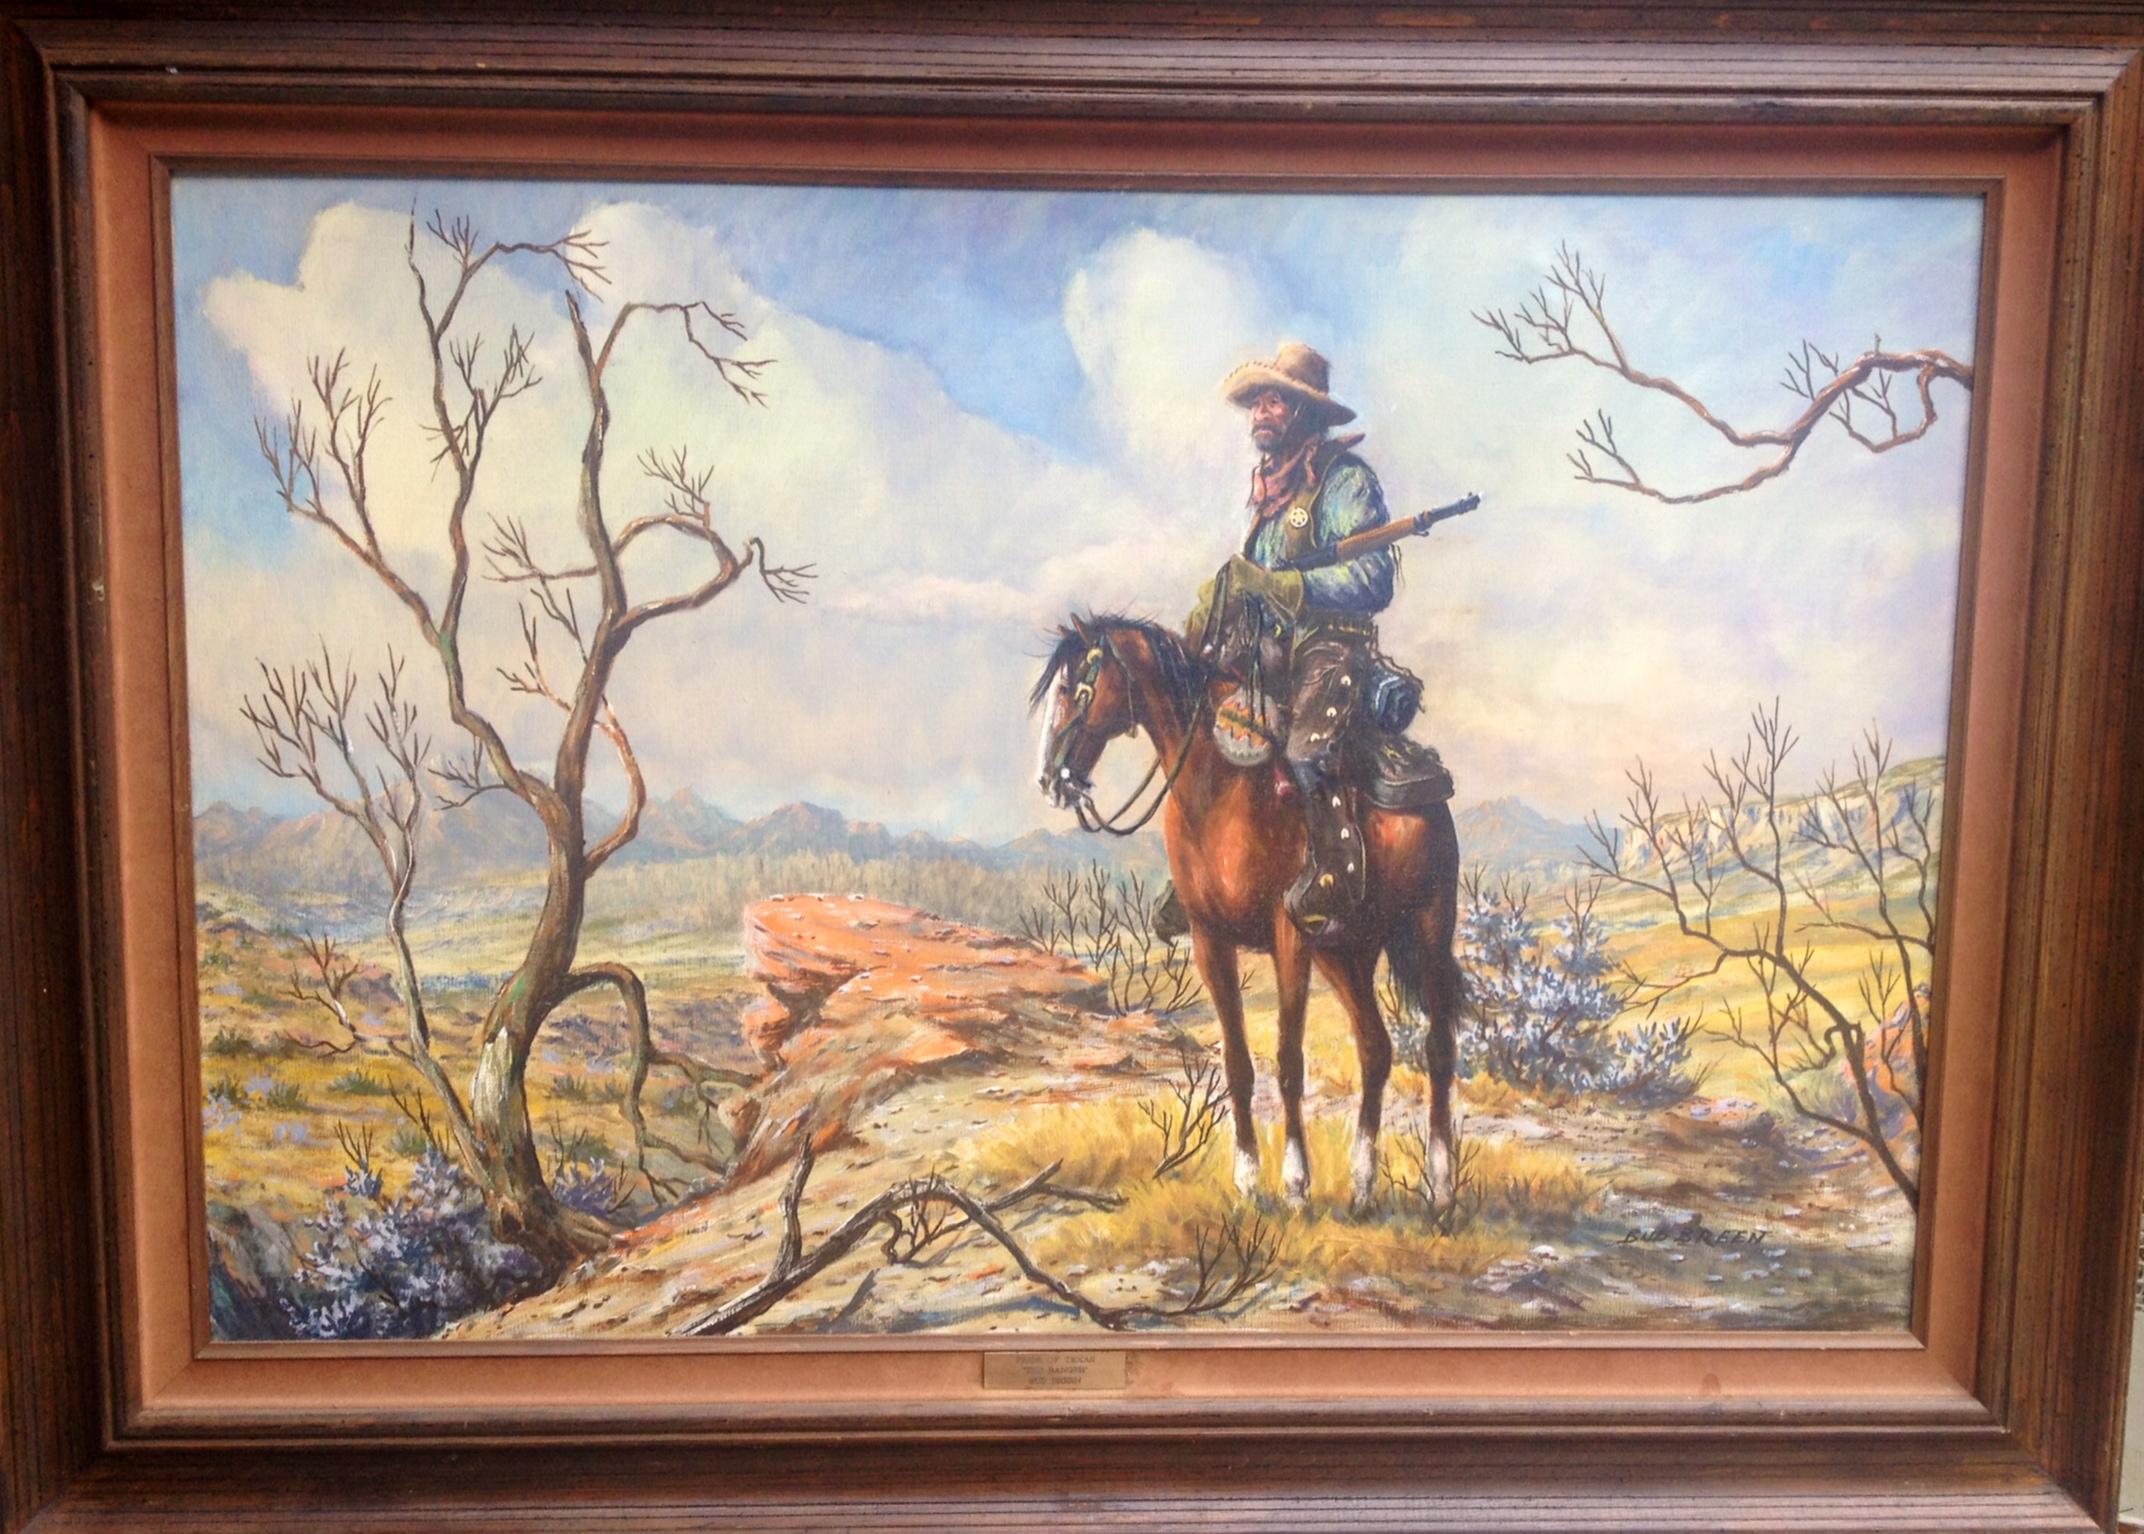 Pride of Texas: the Ranger - Painting by Bud Breen